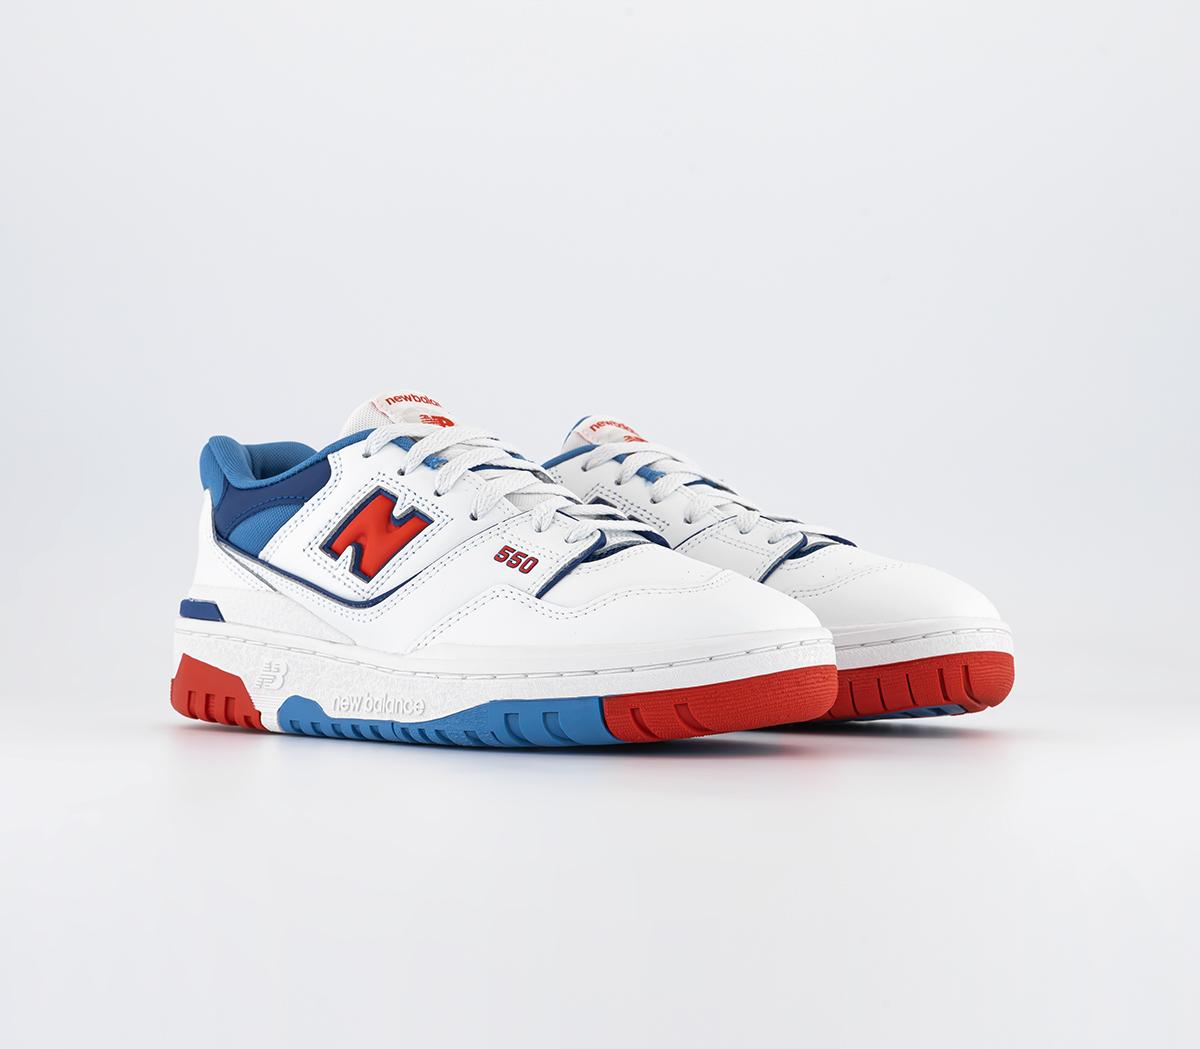 New Balance Bb550 Gs Trainers White Blue Navy Red, 5